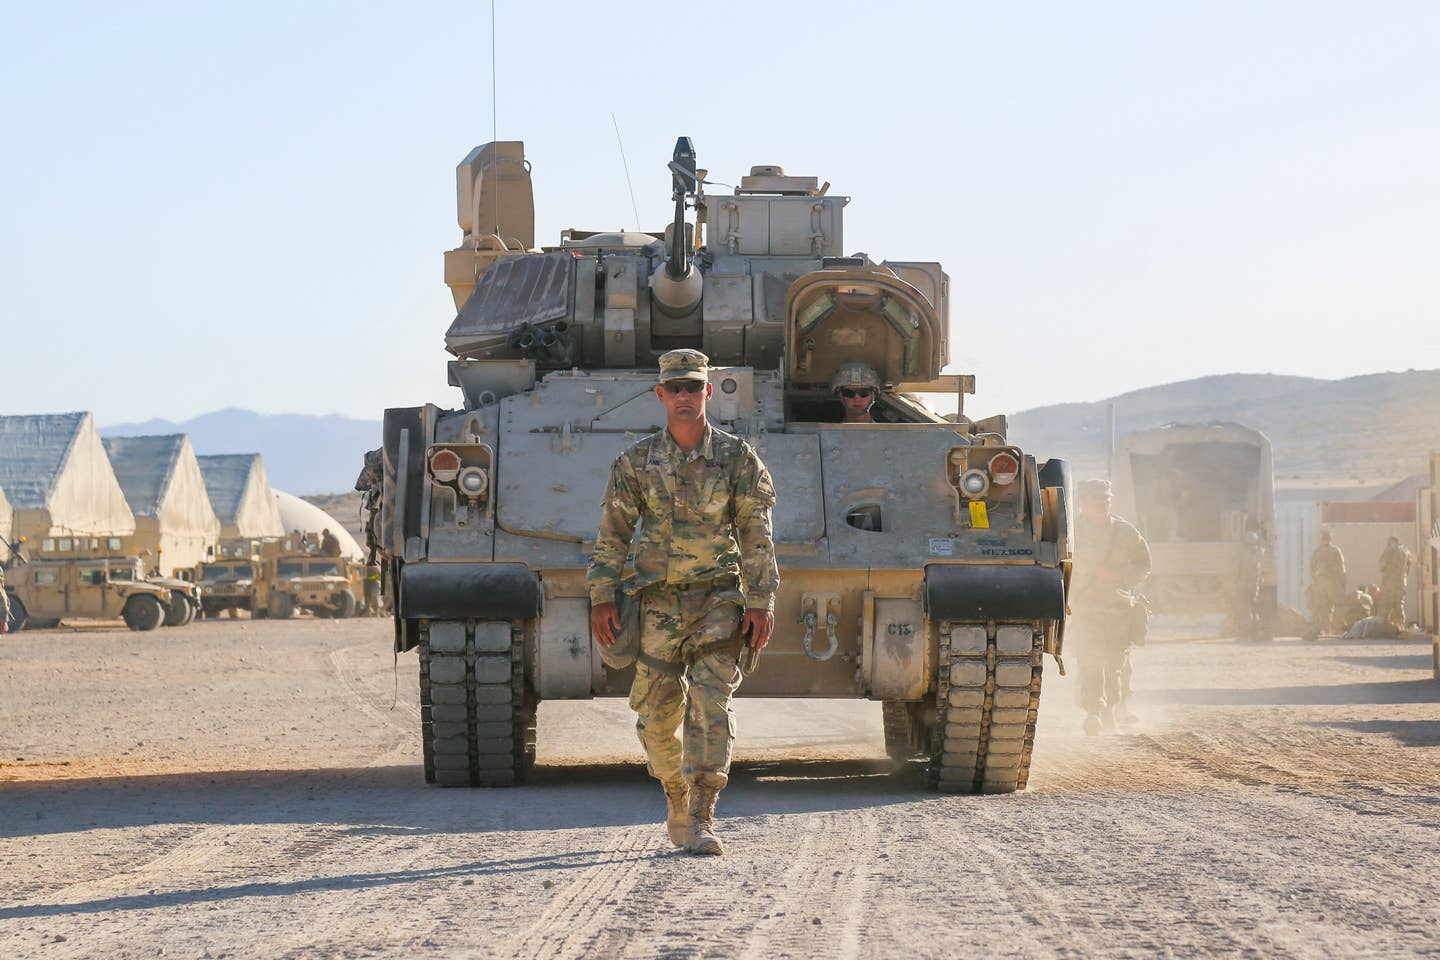 A U.S. Army Soldier assigned to 3rd Armored Brigade Combat Team, 1st Armored Division, Fort Bliss, Texas, ground guides an M2 Bradley Infantry Fighting Vehicle.<br>(U.S. Army Spc. Esmeralda Cervantes)